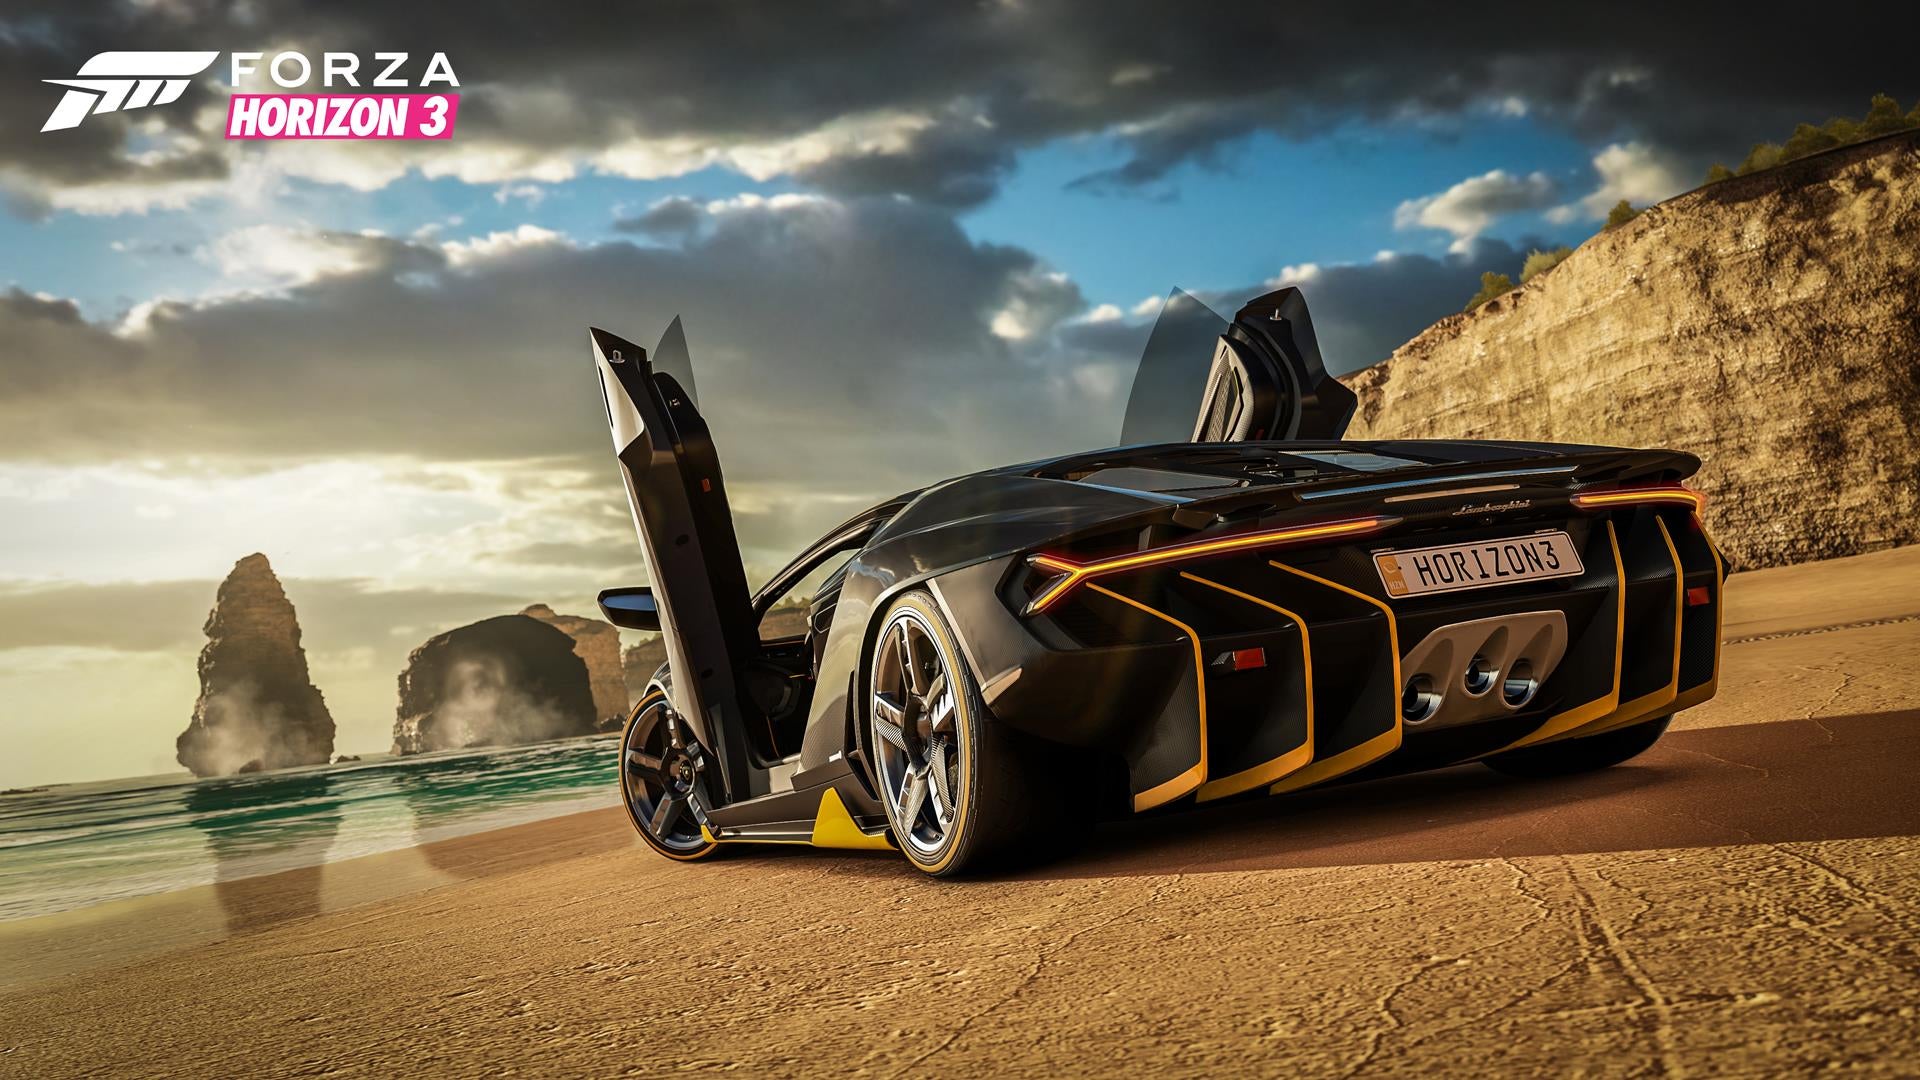 Image for Here's a hands-on look at Forza Horizon 3 gameplay